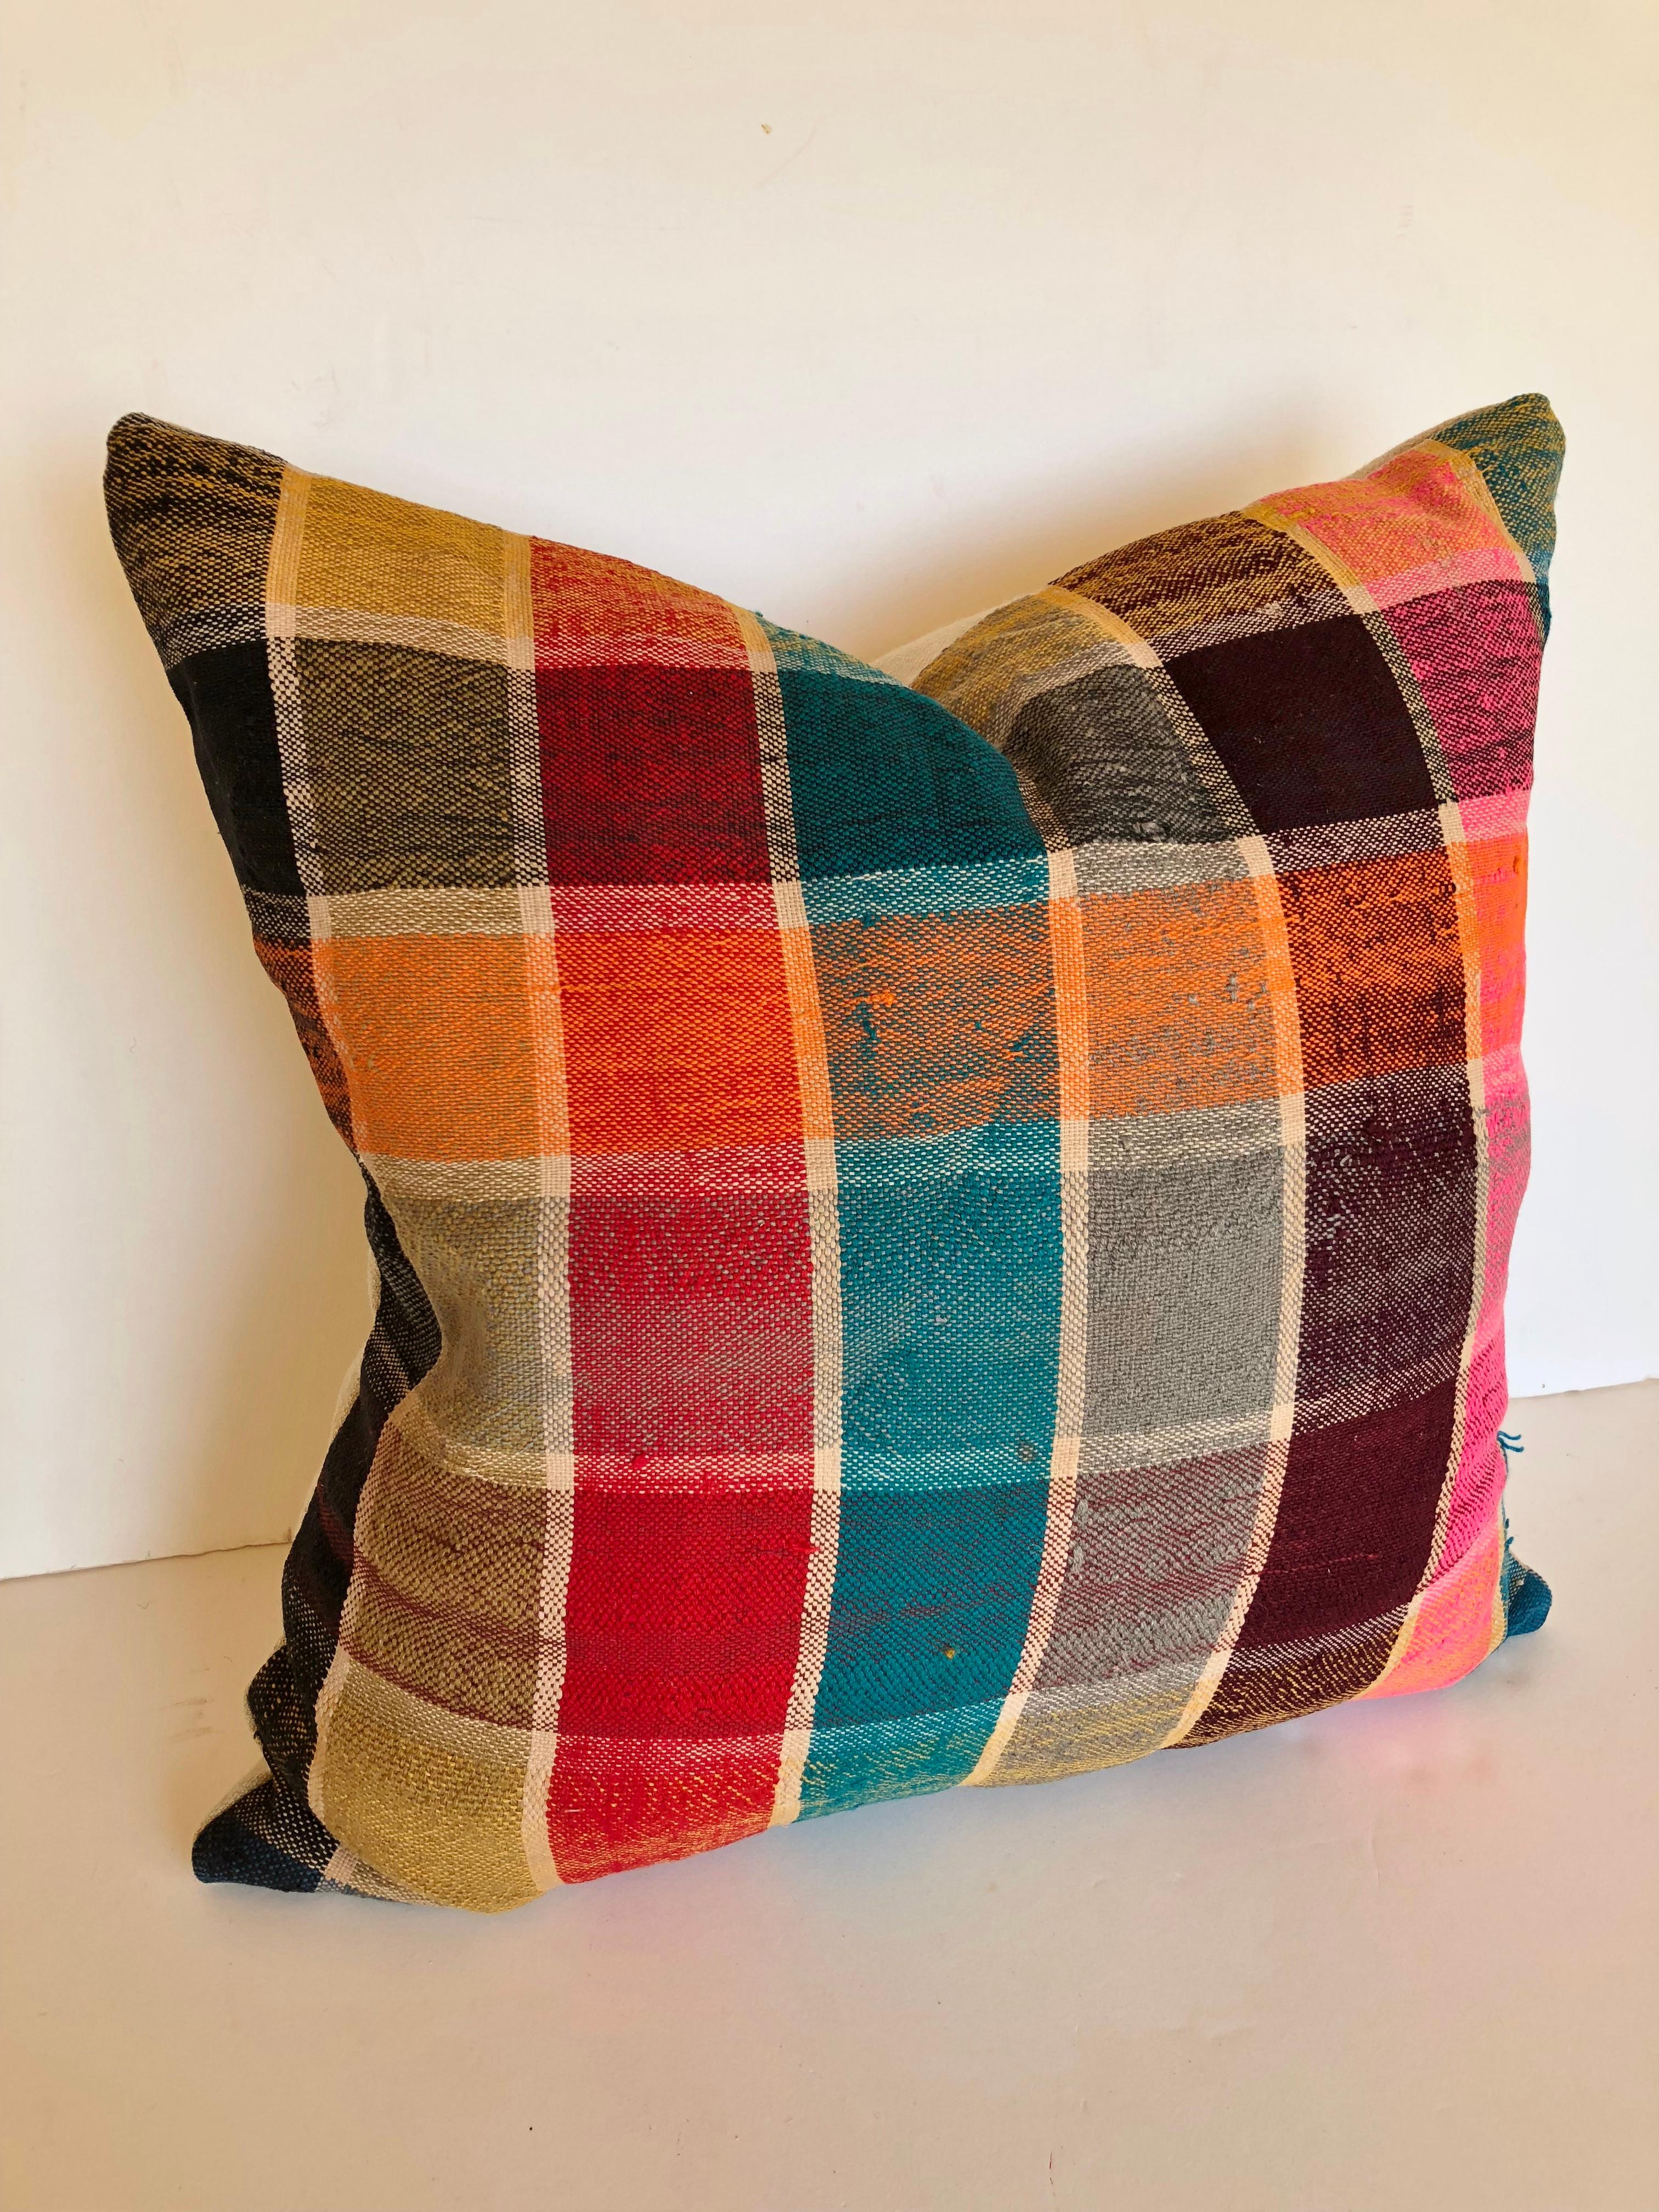 Custom pillow cut from a vintage Moroccan handwoven cotton haik or shawl from the Berber tribes living in the Middle Atlas mountains. Woven in the late 20th century, usually vivid plaid. Pillow is backed in a linen blend, filled with a mix of 50/50